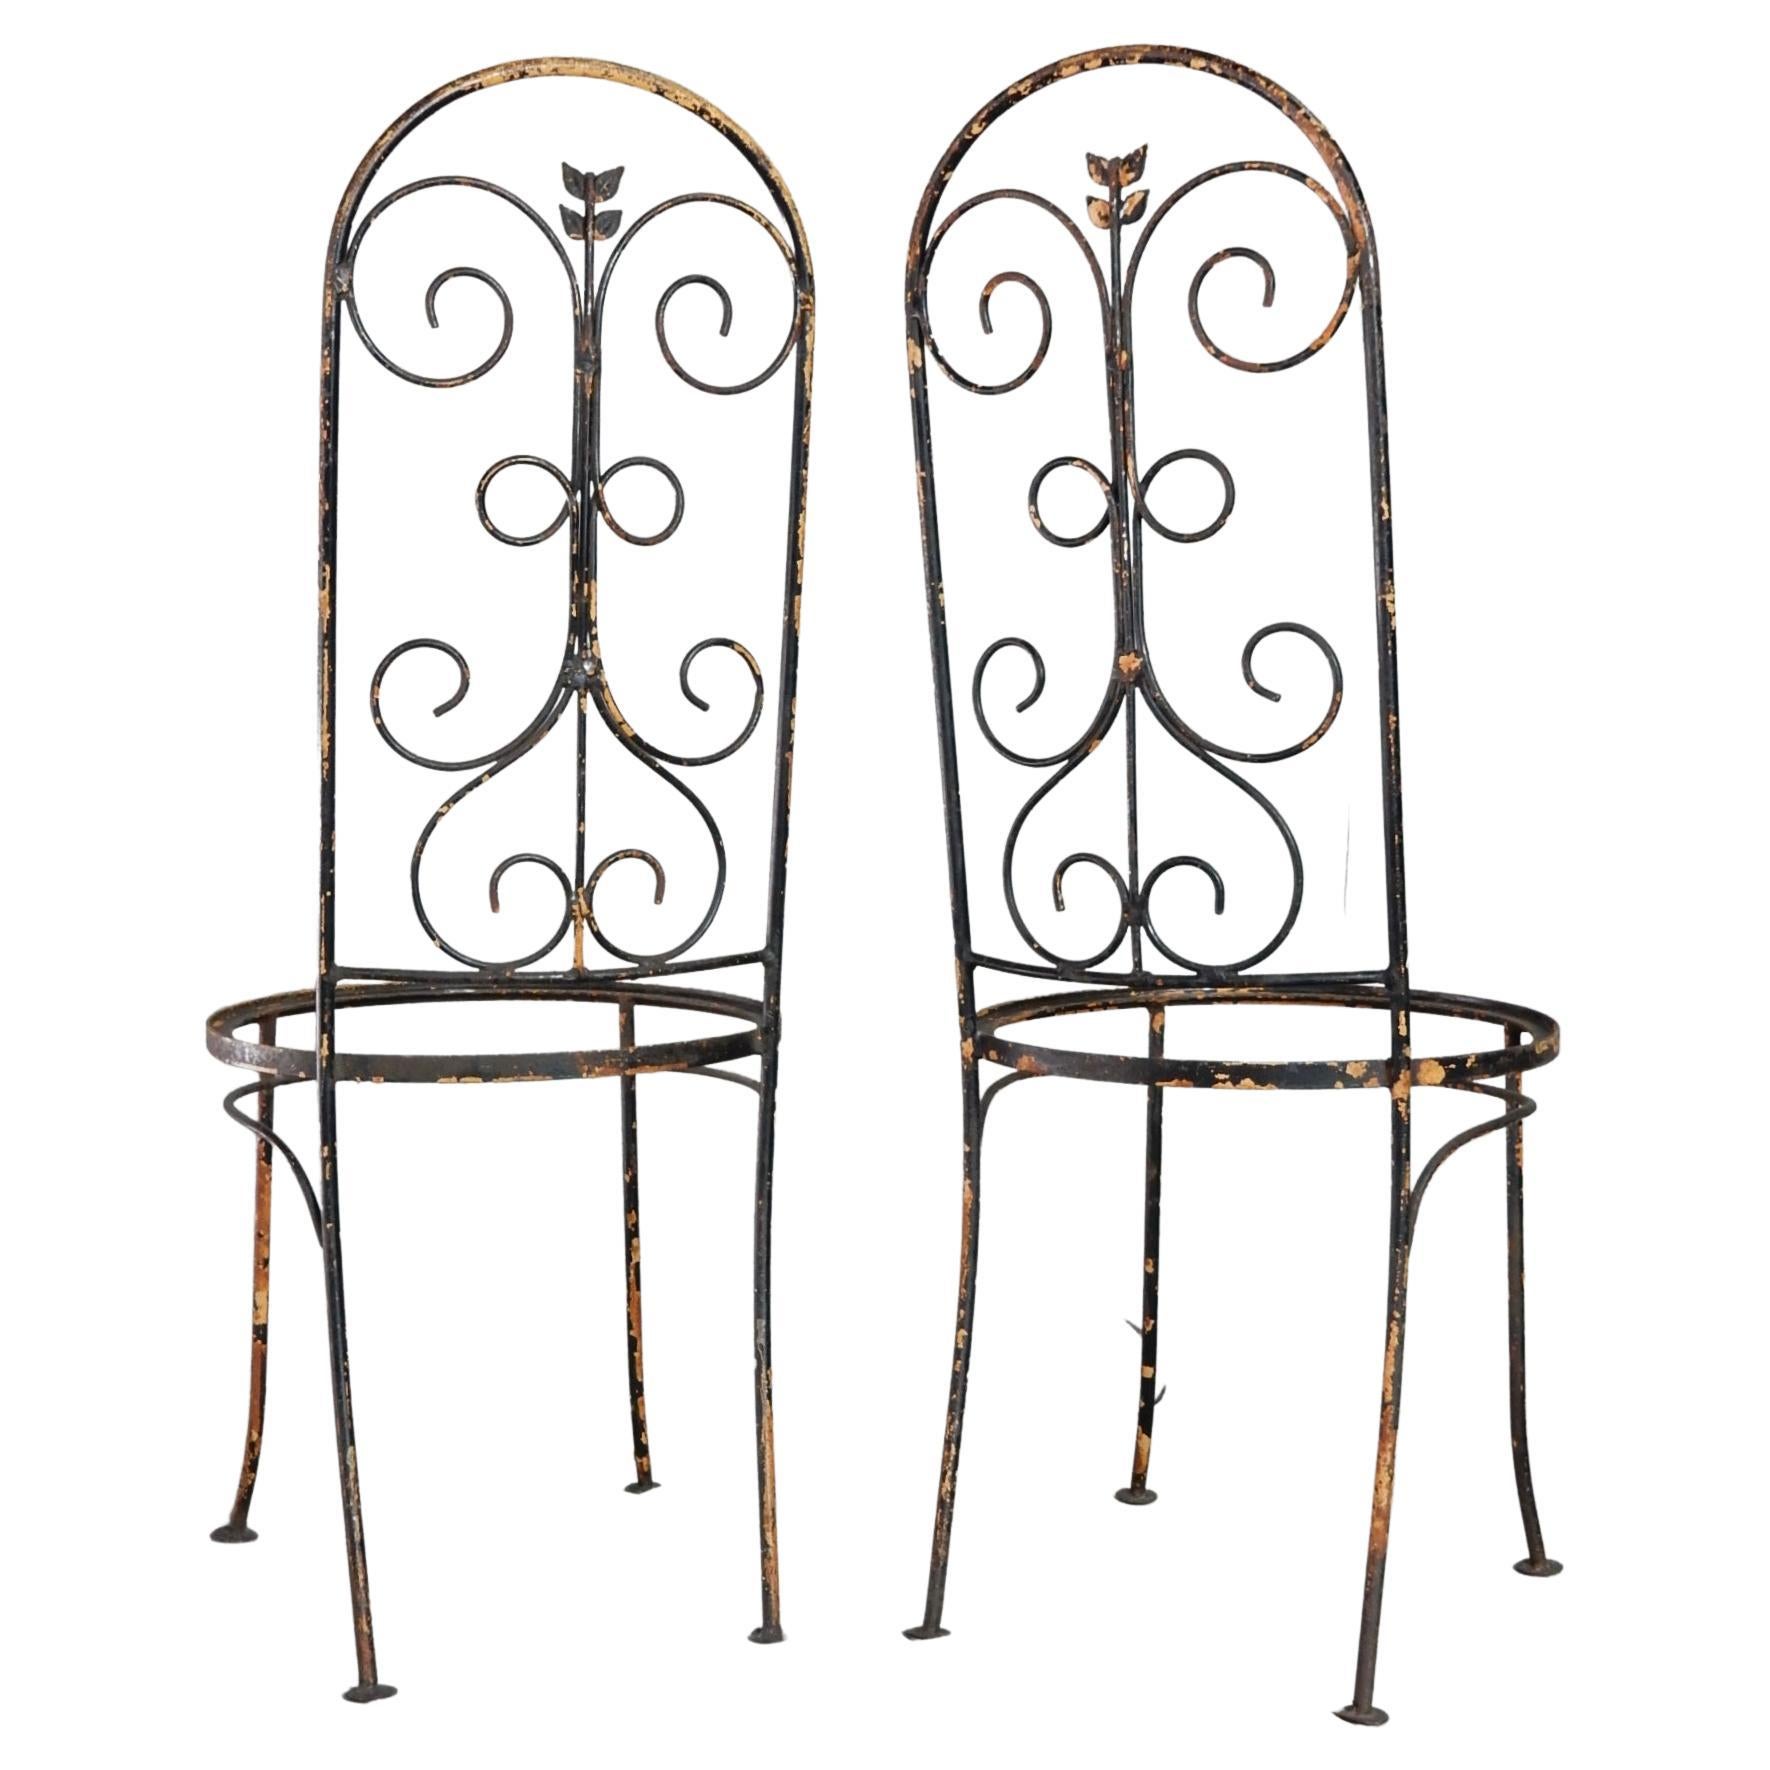 French Provincial 1940's French Artistic Iron Tall Back Garden Patio Chairs For Sale